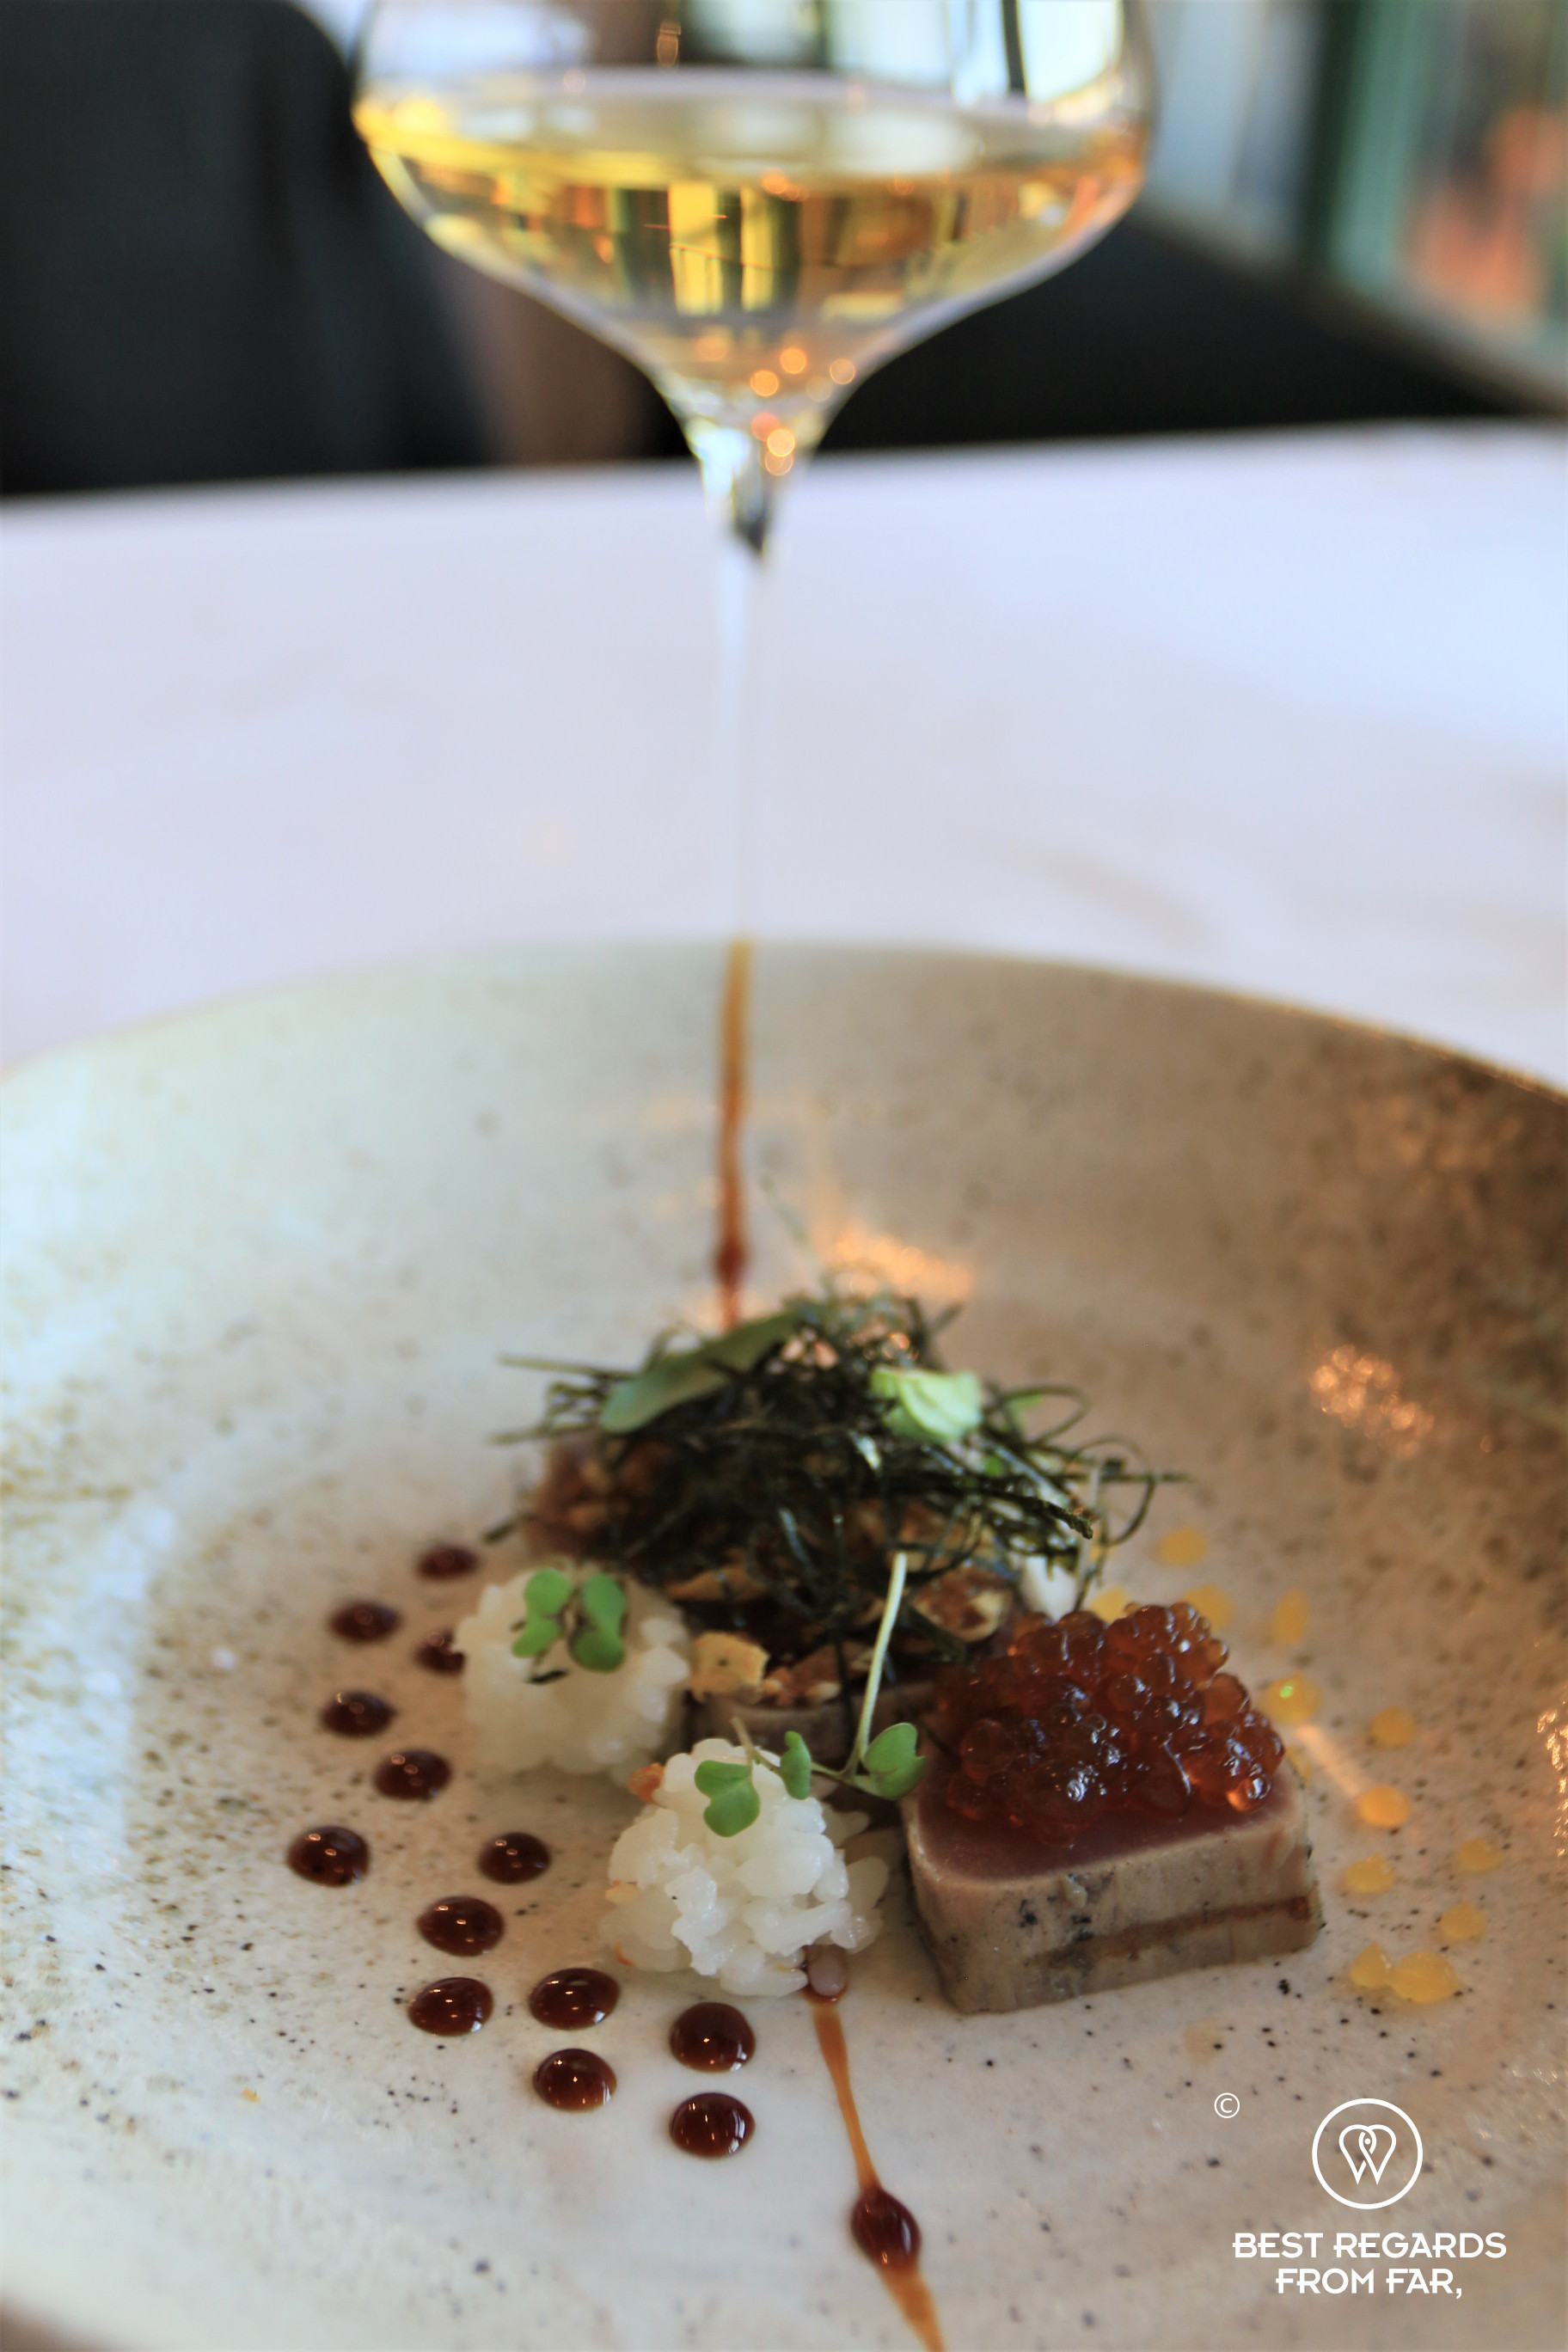 Pan-seared tuna with wine at Salsify, Cape Town